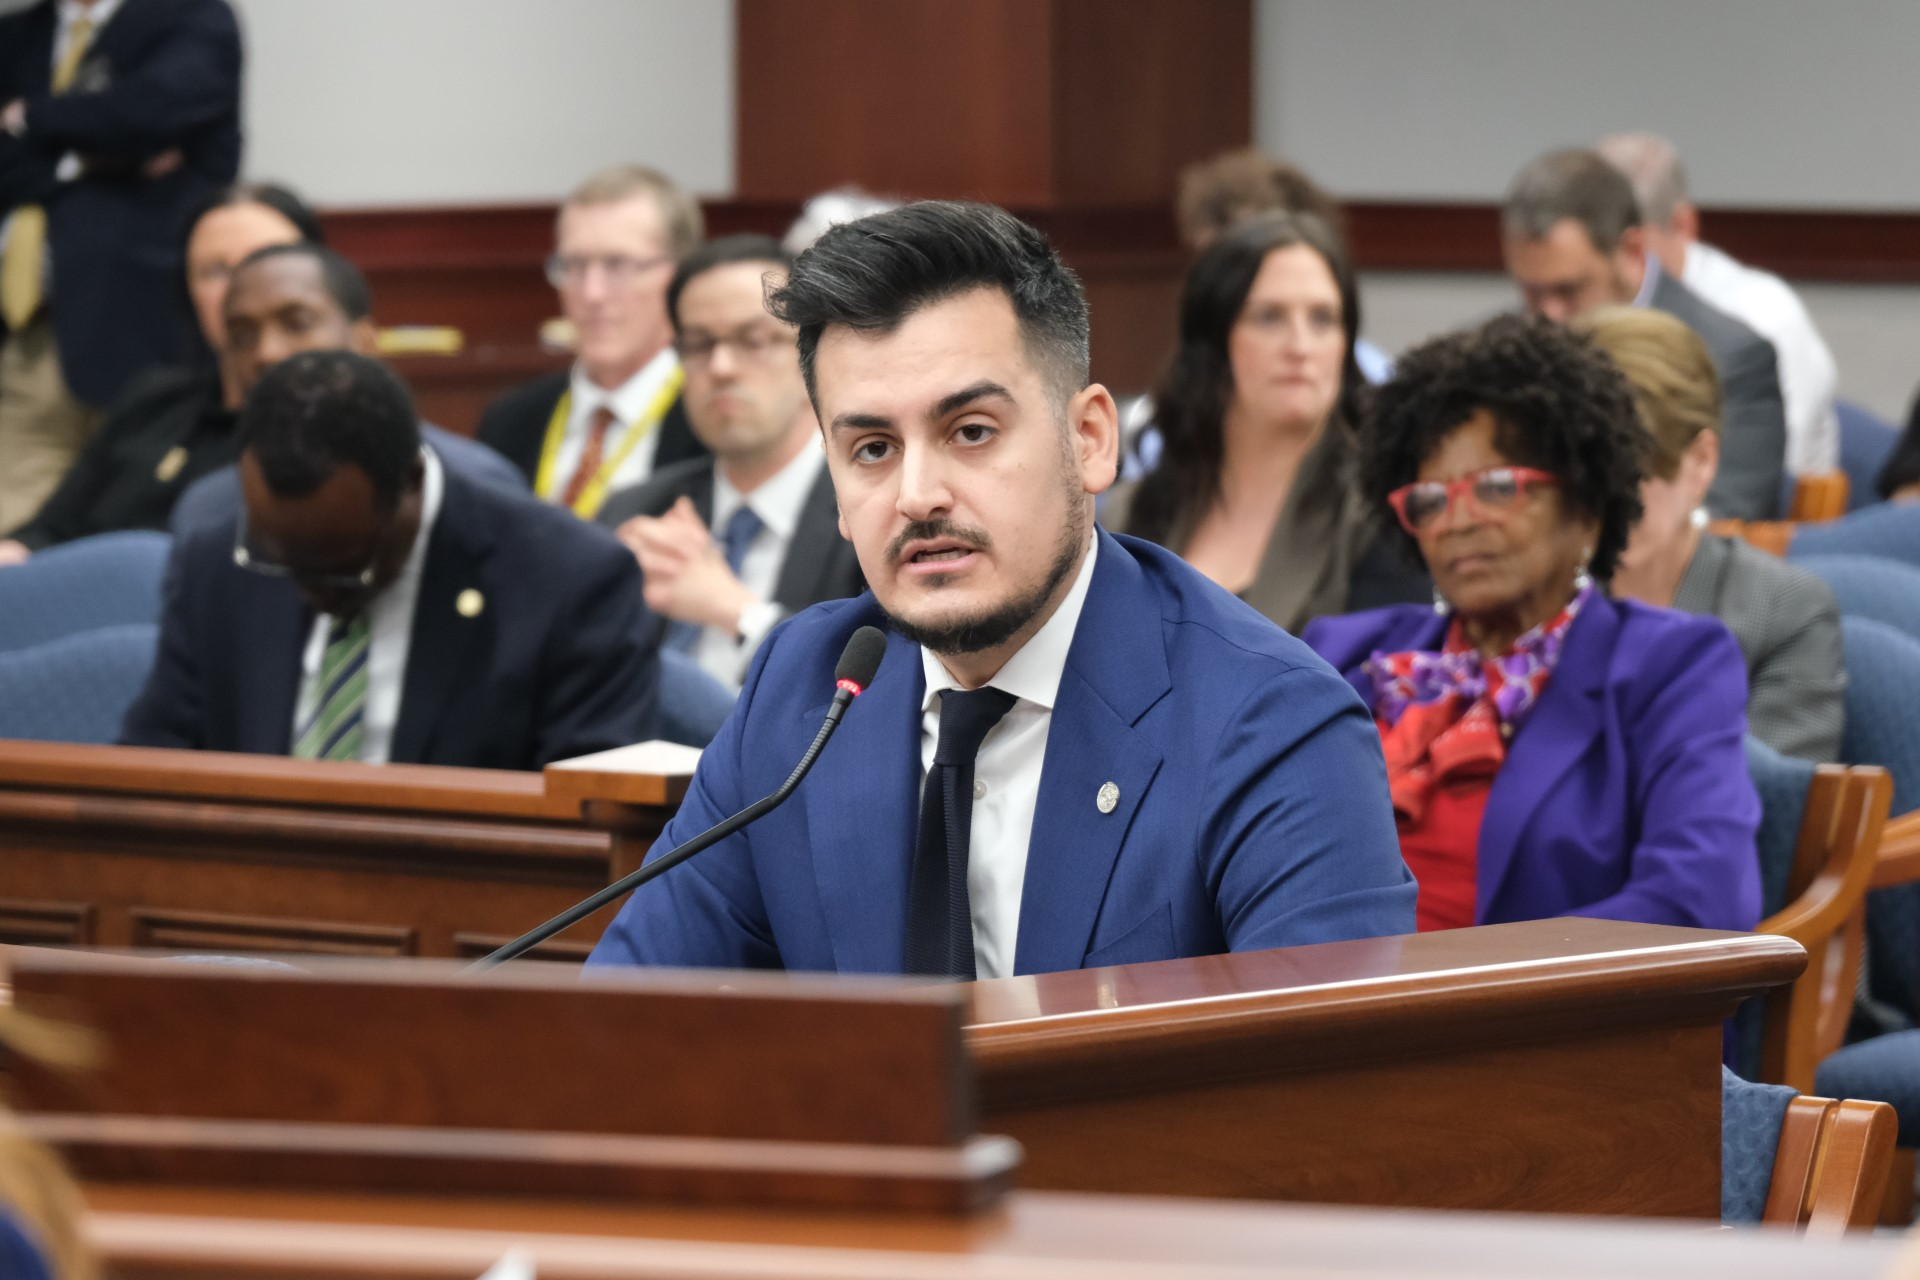 Sen. Darrin Camilleri (D-Trenton) testifies before the Michigan Senate Elections and Ethics Committee on his legislation, Senate Bill 401, and the entire Michigan Voting Rights Act to strengthen democracy in our state.